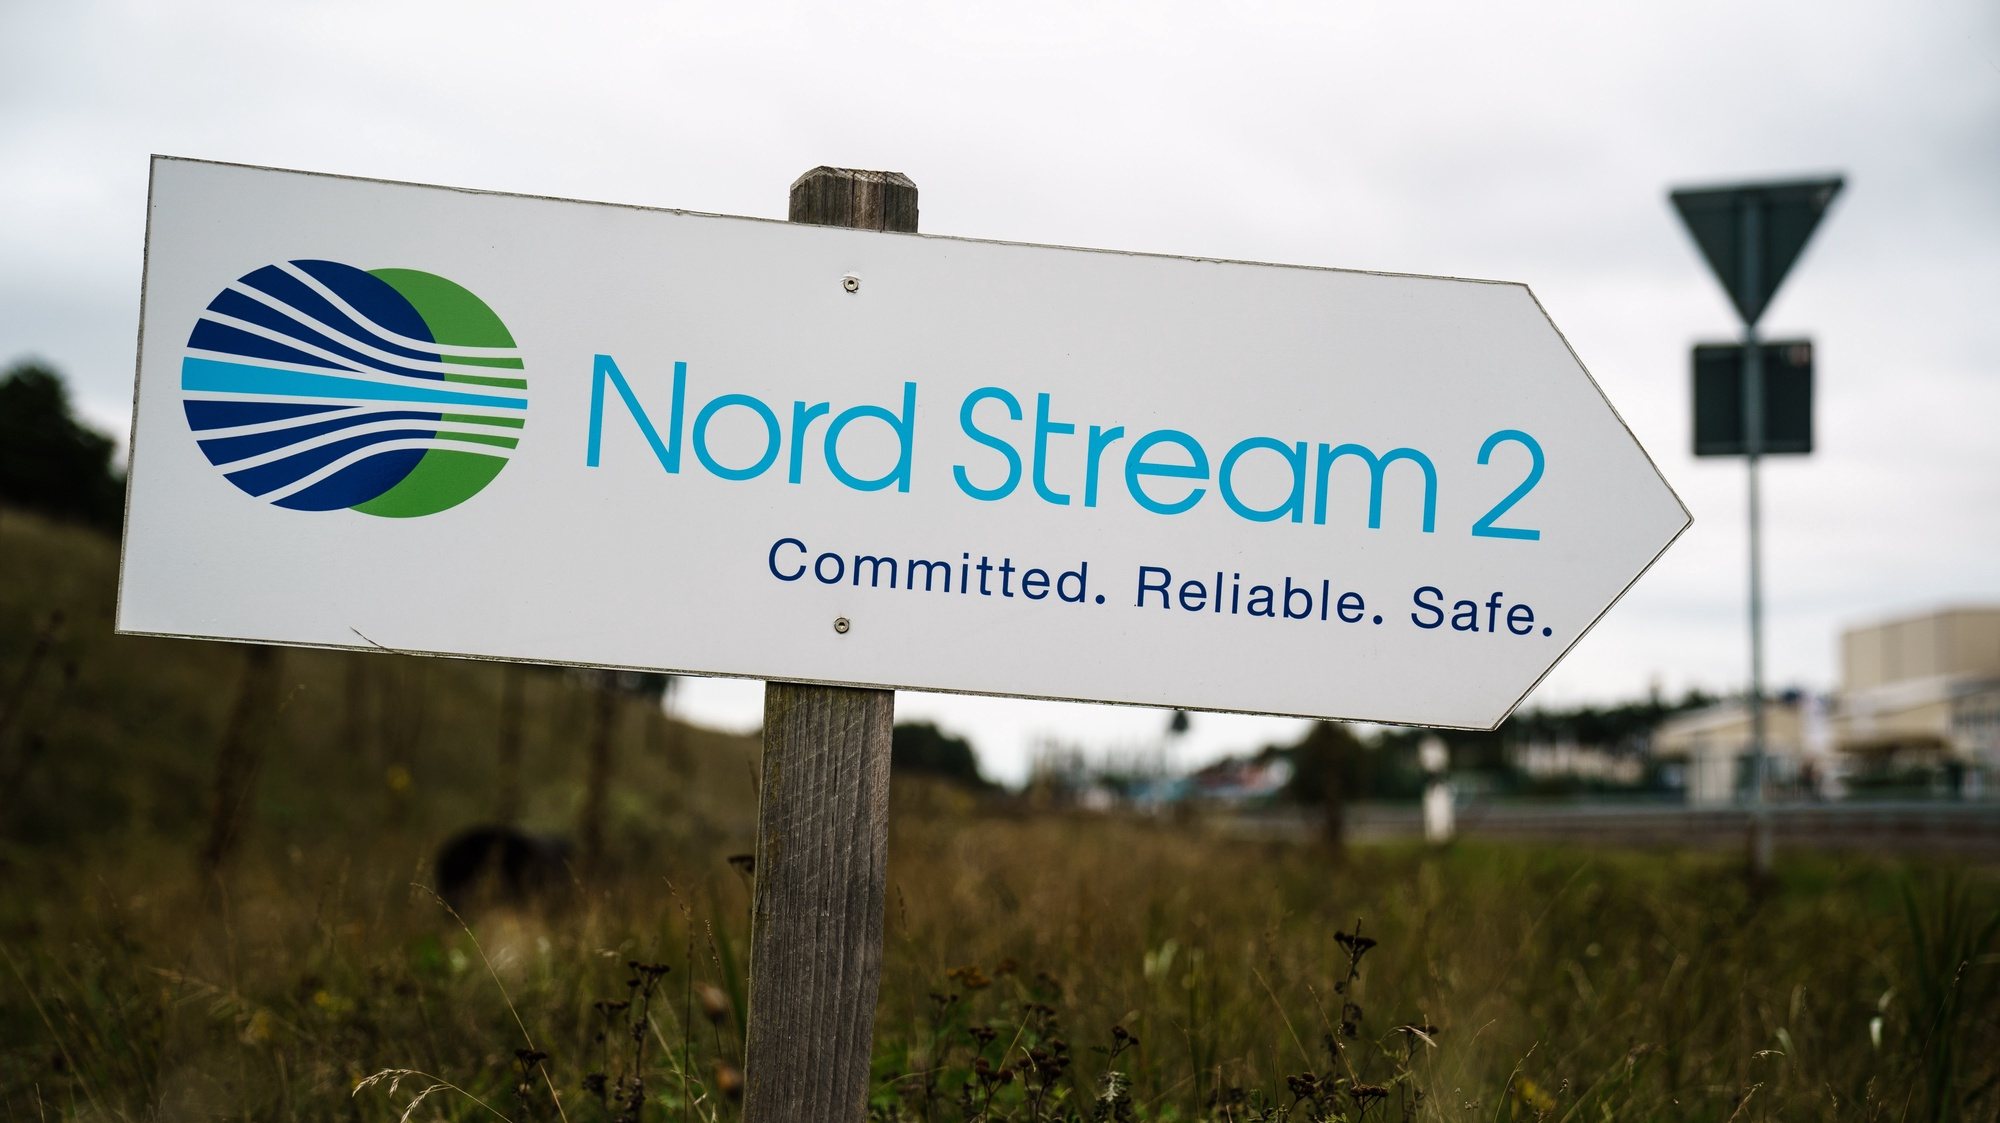 epa08748004 A sign reading ’Nord Stream 2 - Committed. Reliable. Safe.’ picutured near the pipeline landfall facility after a visit of Mecklenburg-Western Pomerania State Premier Manuela Schwesig (not in the picture) to the industrial port and the landfall facility of the joint German-Russian pipeline project Nord Stream 2, in Lubmin, Germany, 15 October 2020. The politically controversial pipeline project was put into question in response to the alleged poisoning of Kreml critic Alexei Navalny. Schwesig wants to save the gas pipeline that she regards an important infrastructure project.  EPA/CLEMENS BILAN